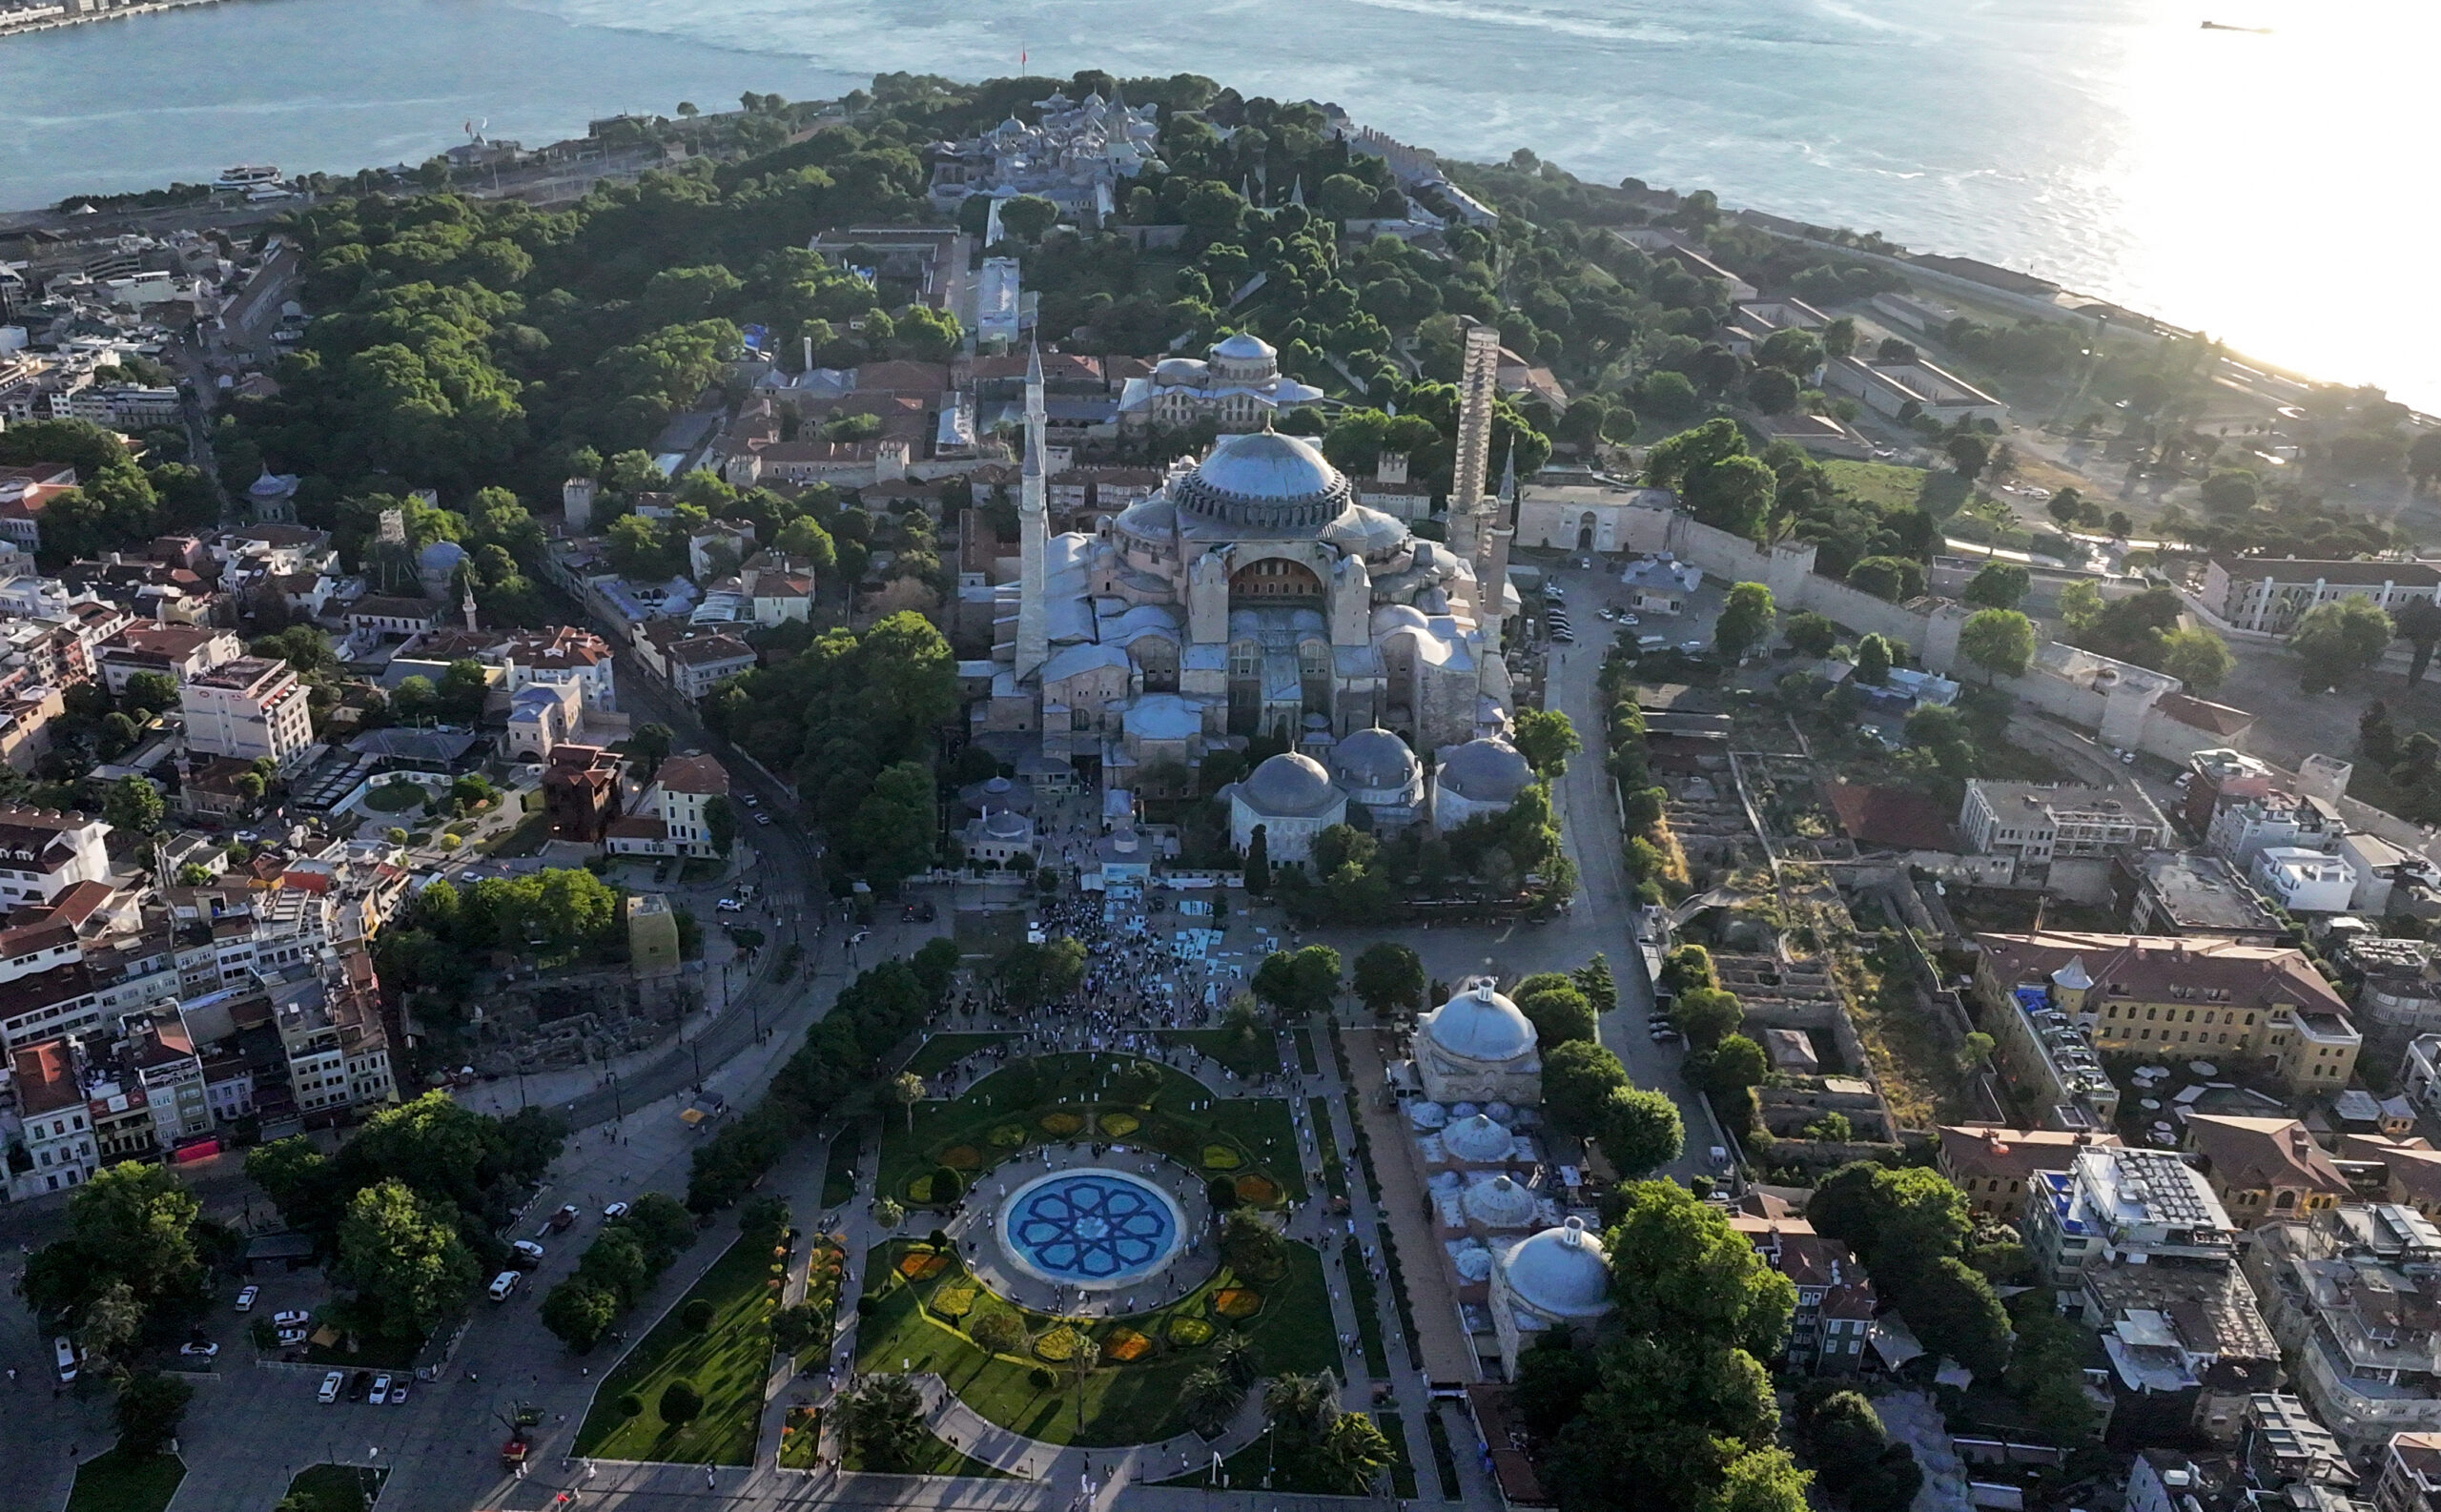 Hagia Sophia set for 3rd largest restoration in its history with 'digital twin'